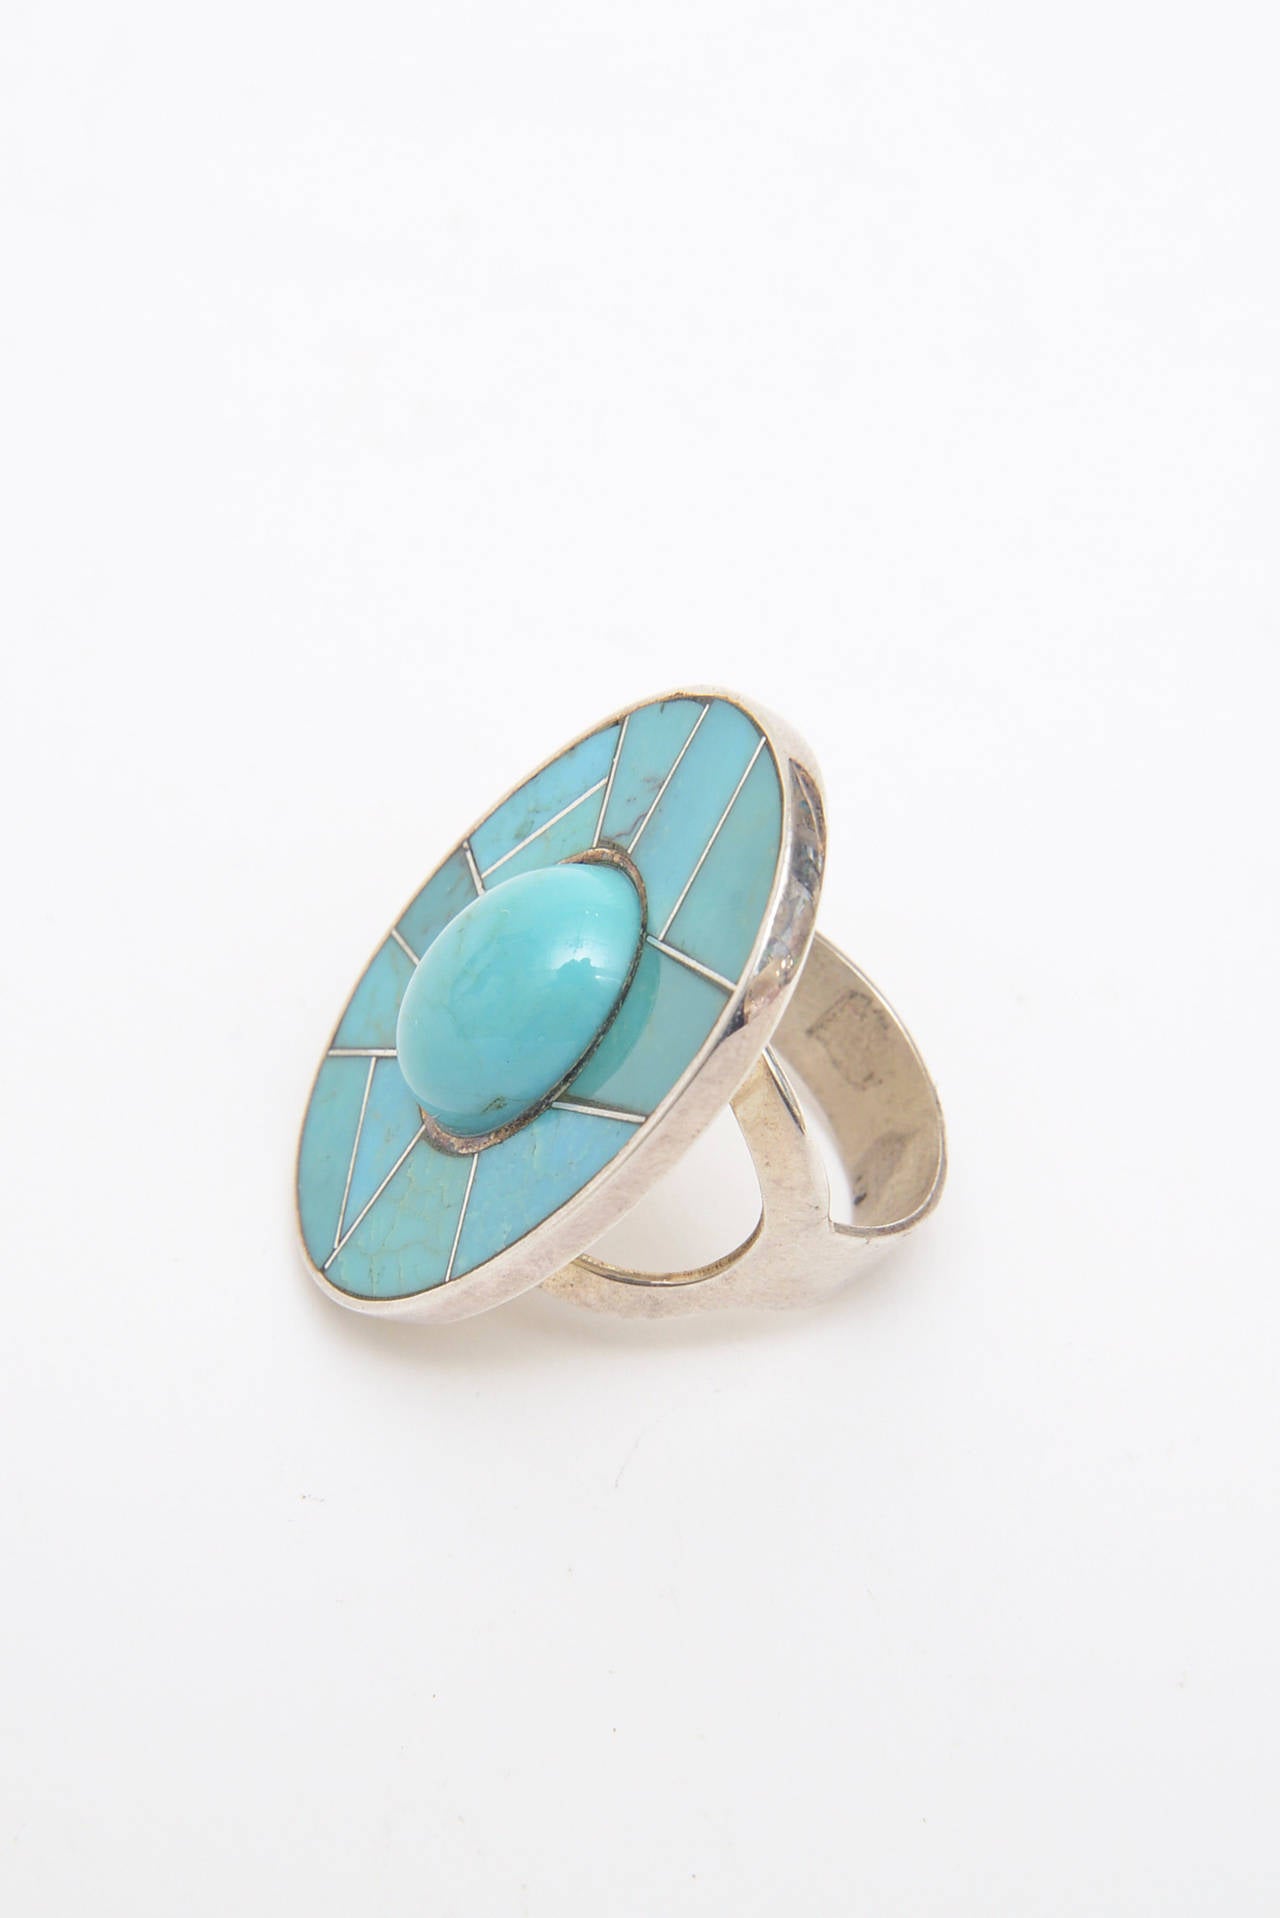  Sterling Silver and Turquoise Sculptural Ring 2